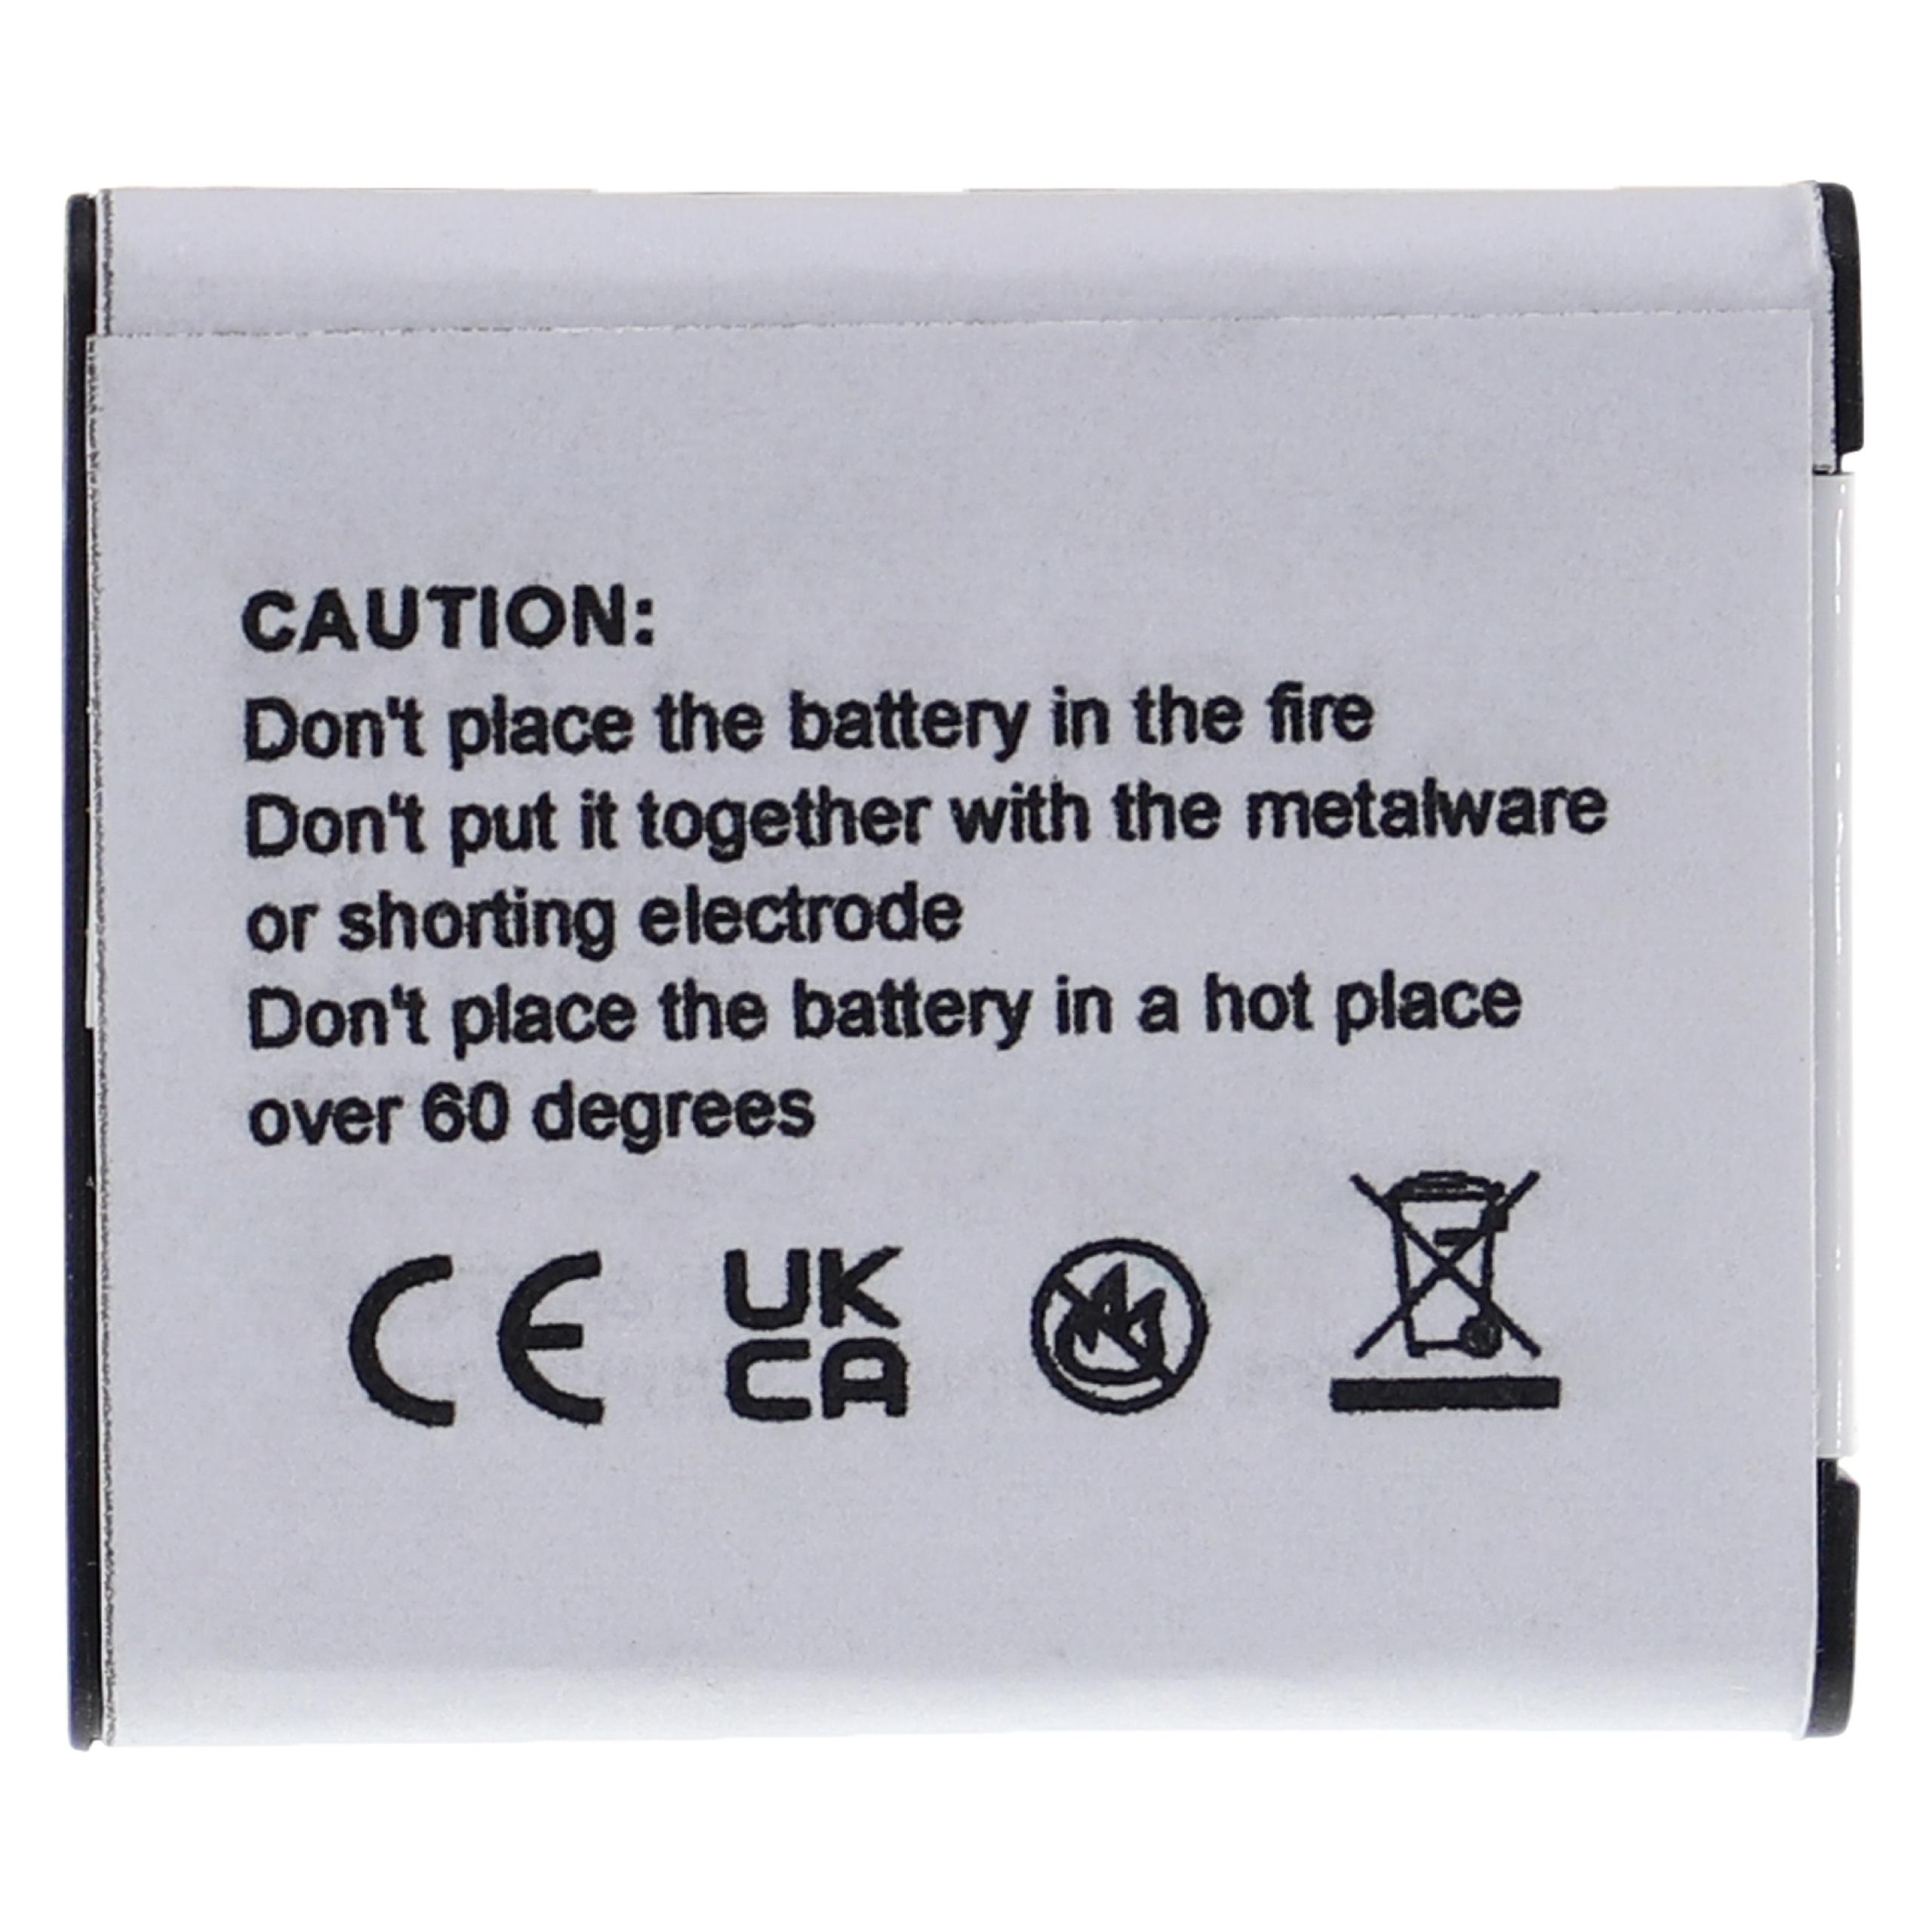 Battery Replacement for Casio NP-120DBA, NP-120 - 630mAh, 3.7V, Li-Ion